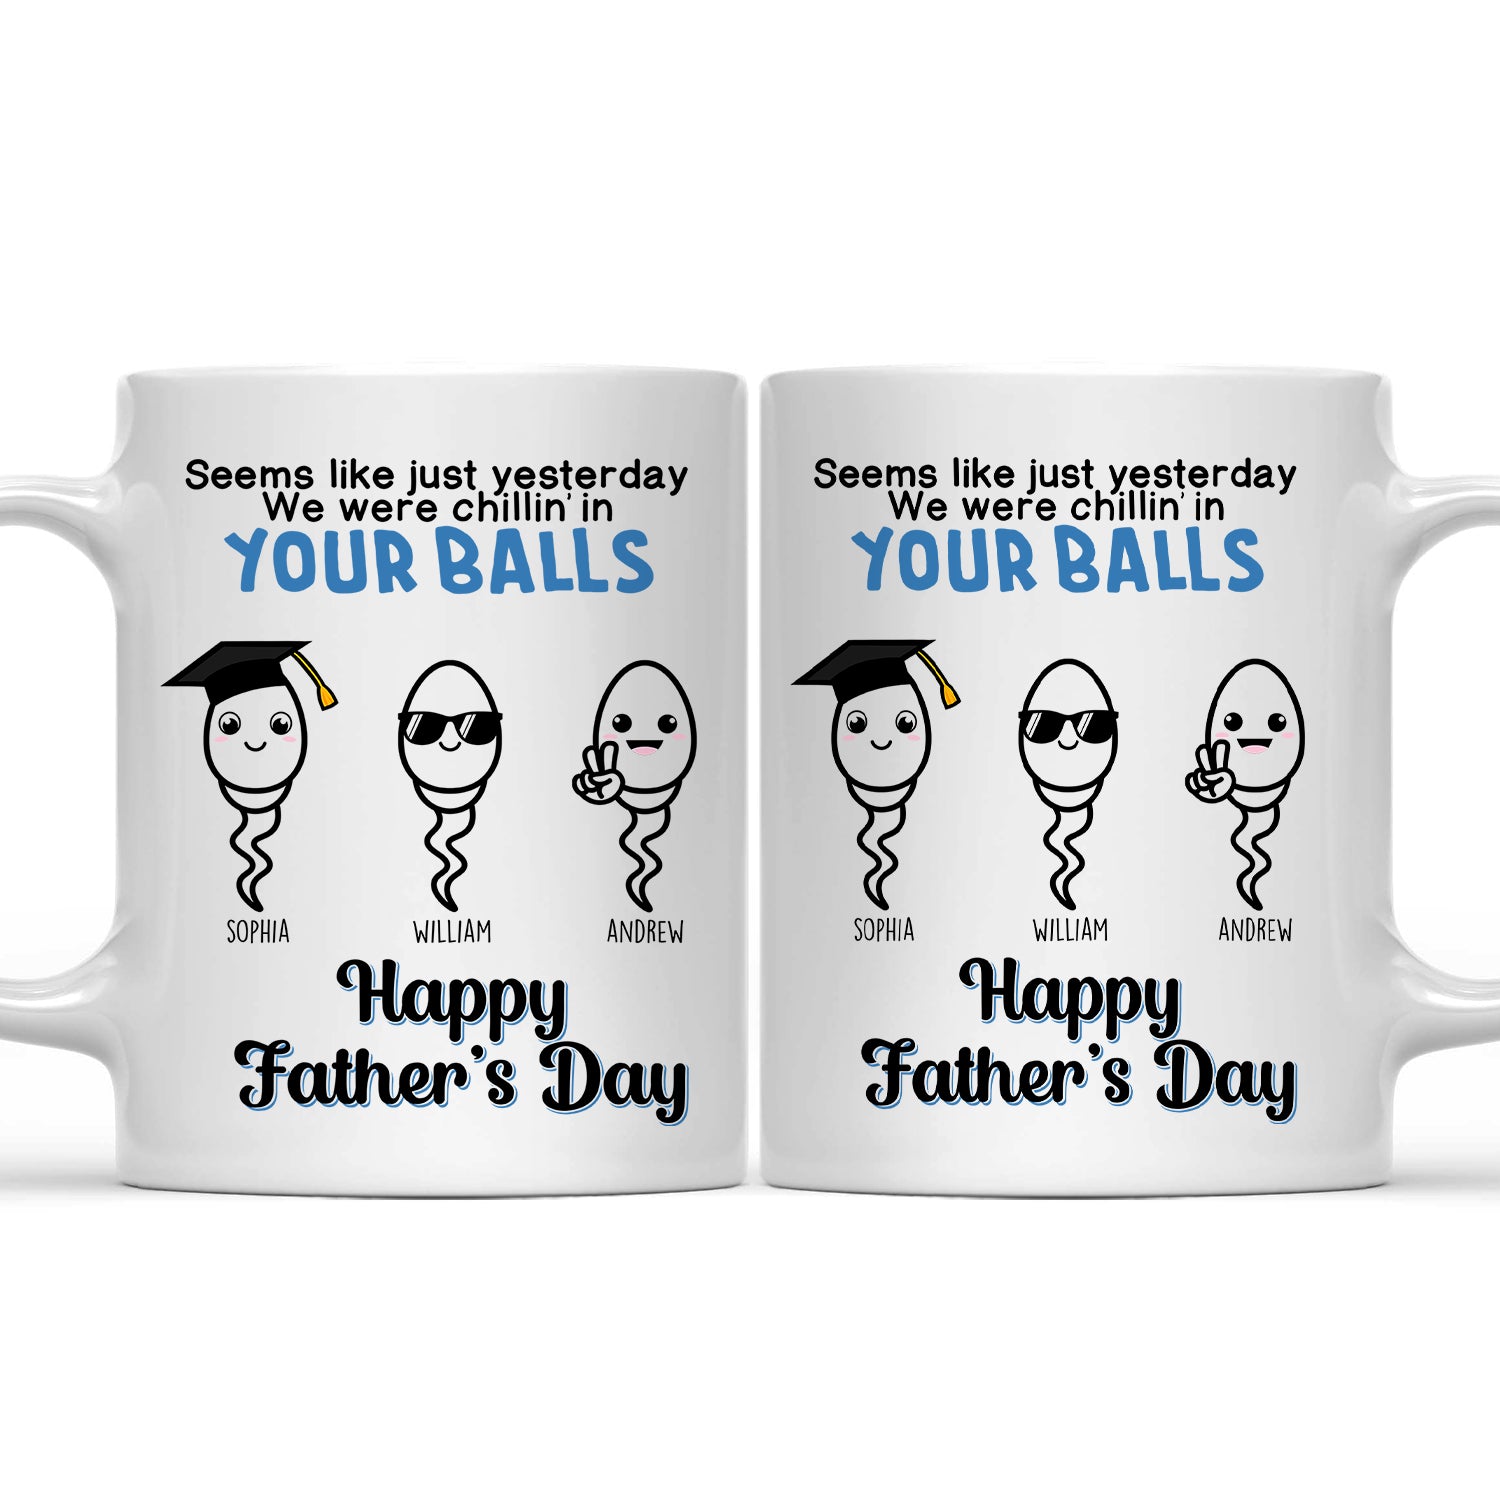 Seems Like Just Yesterday - Funny Gift For Dad, Father, Grandpa - Personalized Mug